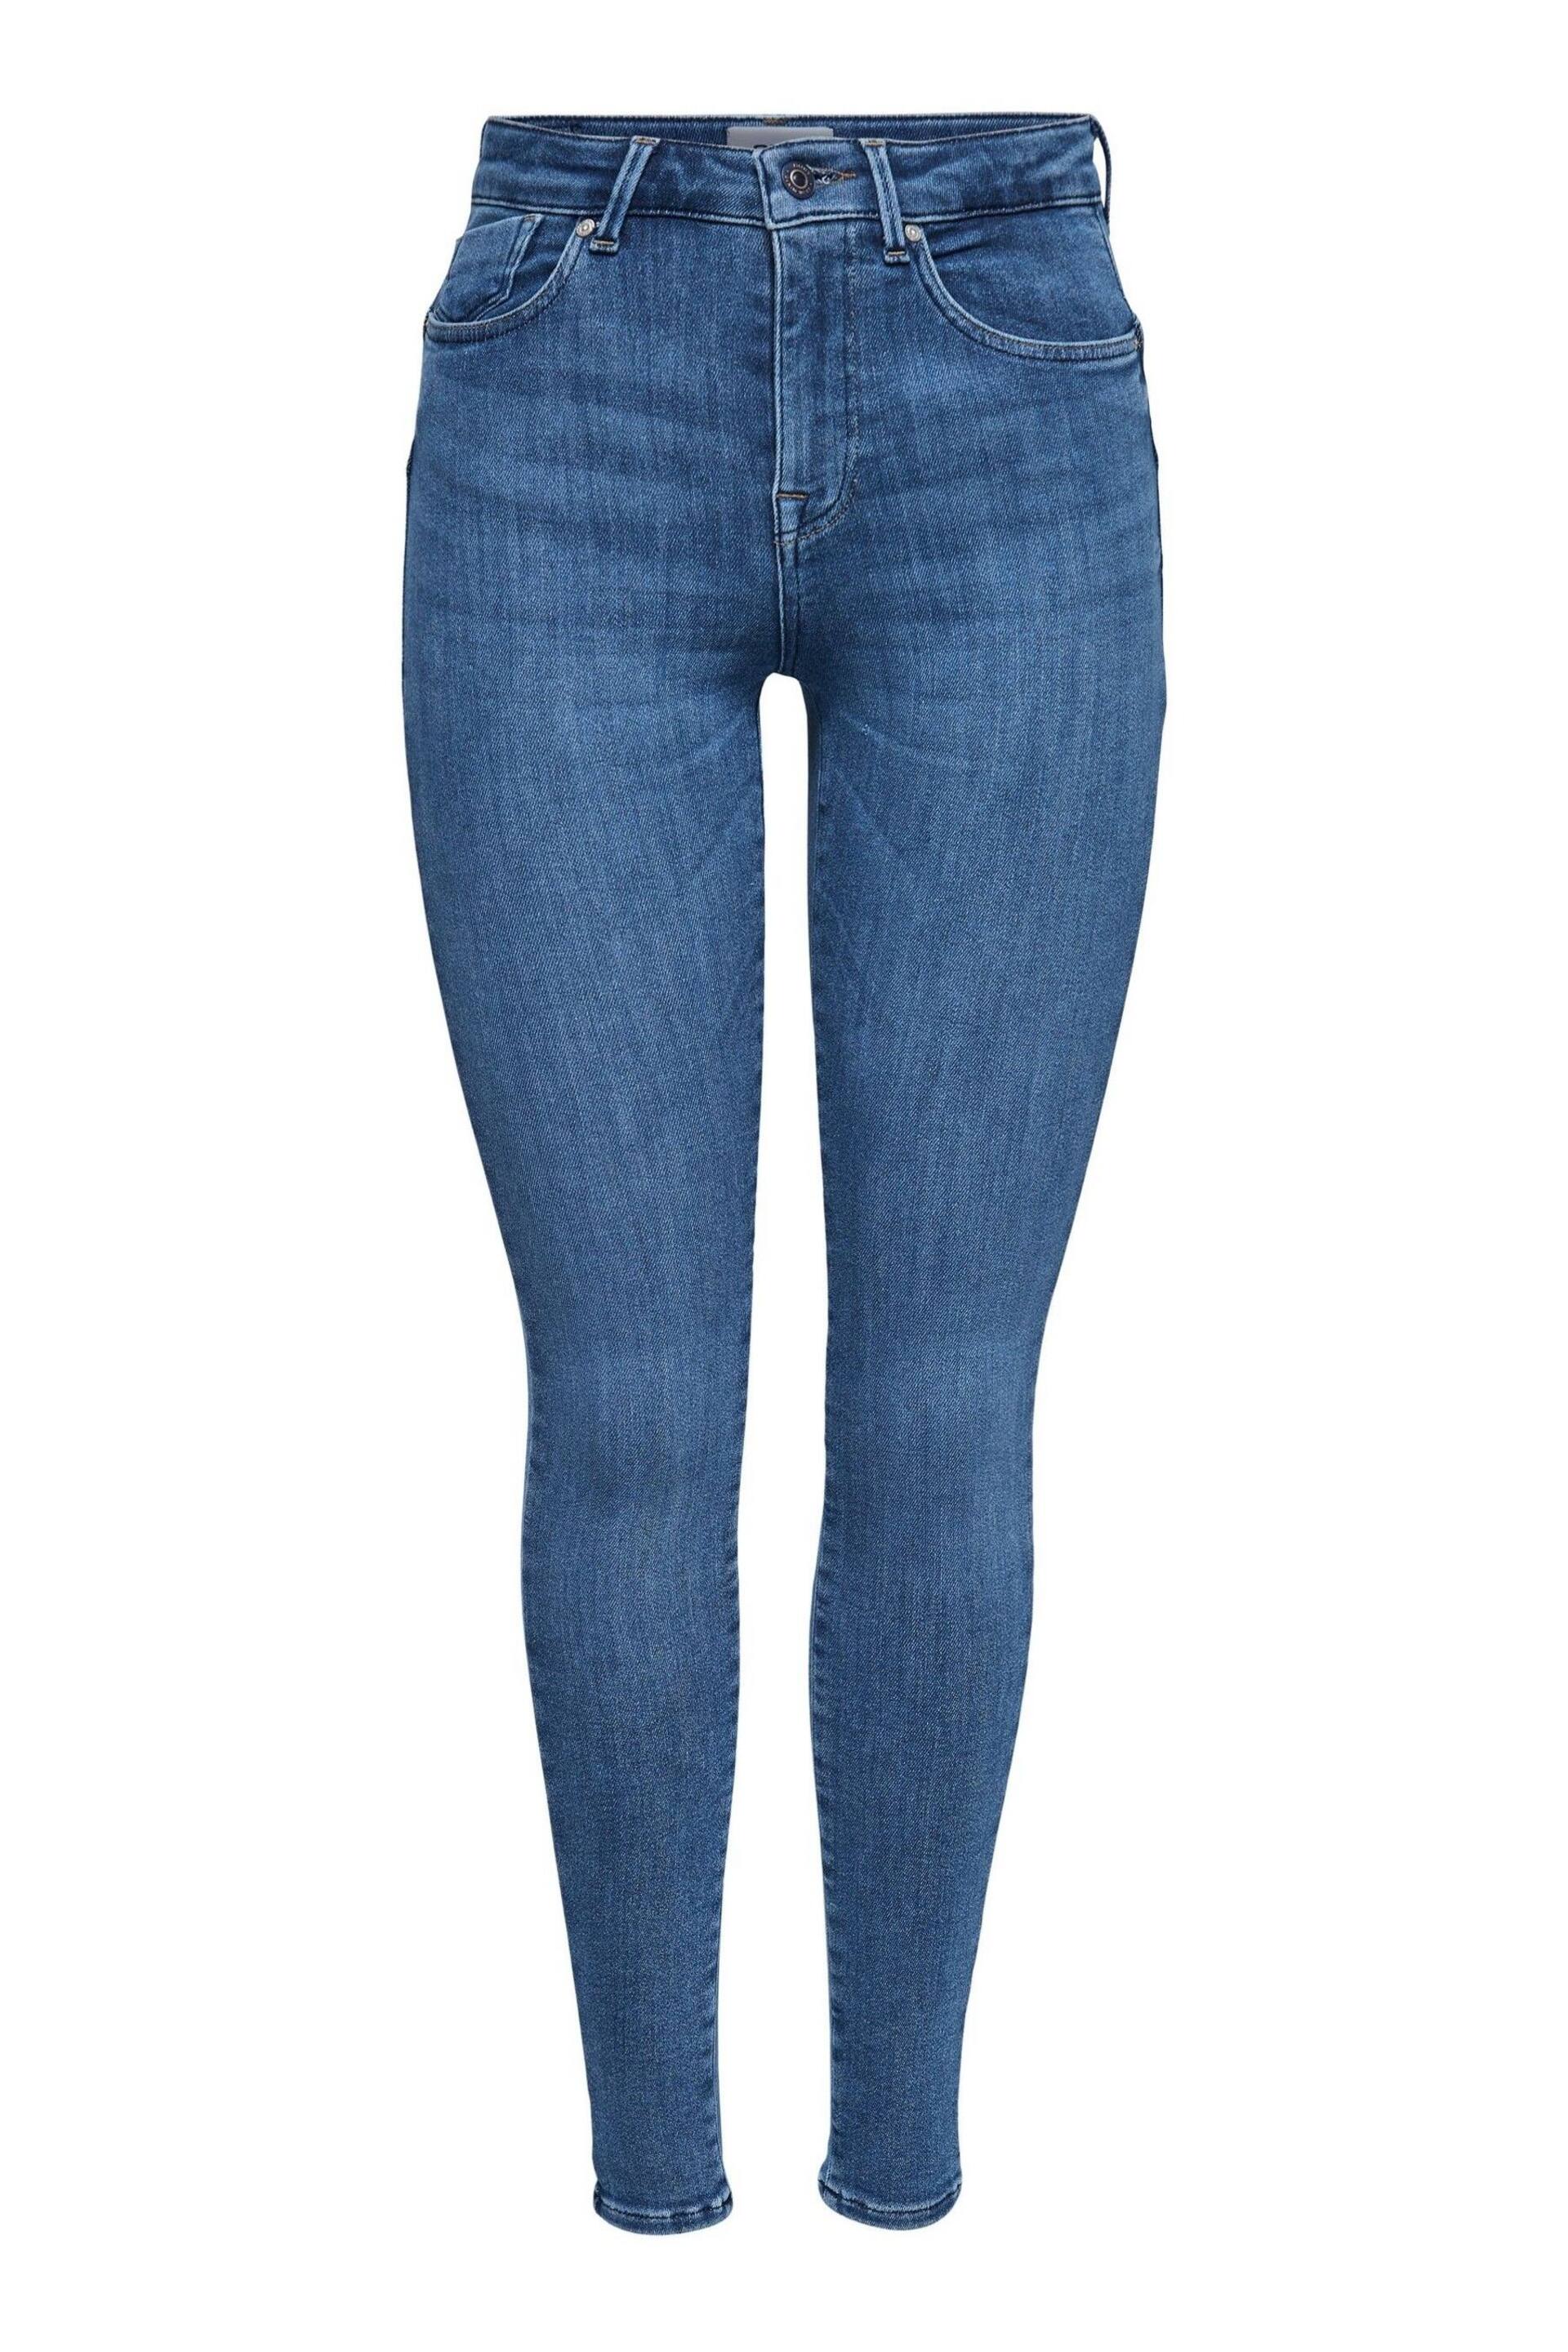 ONLY Blue Power Push Up Extra Skinny Jeans - Image 5 of 6